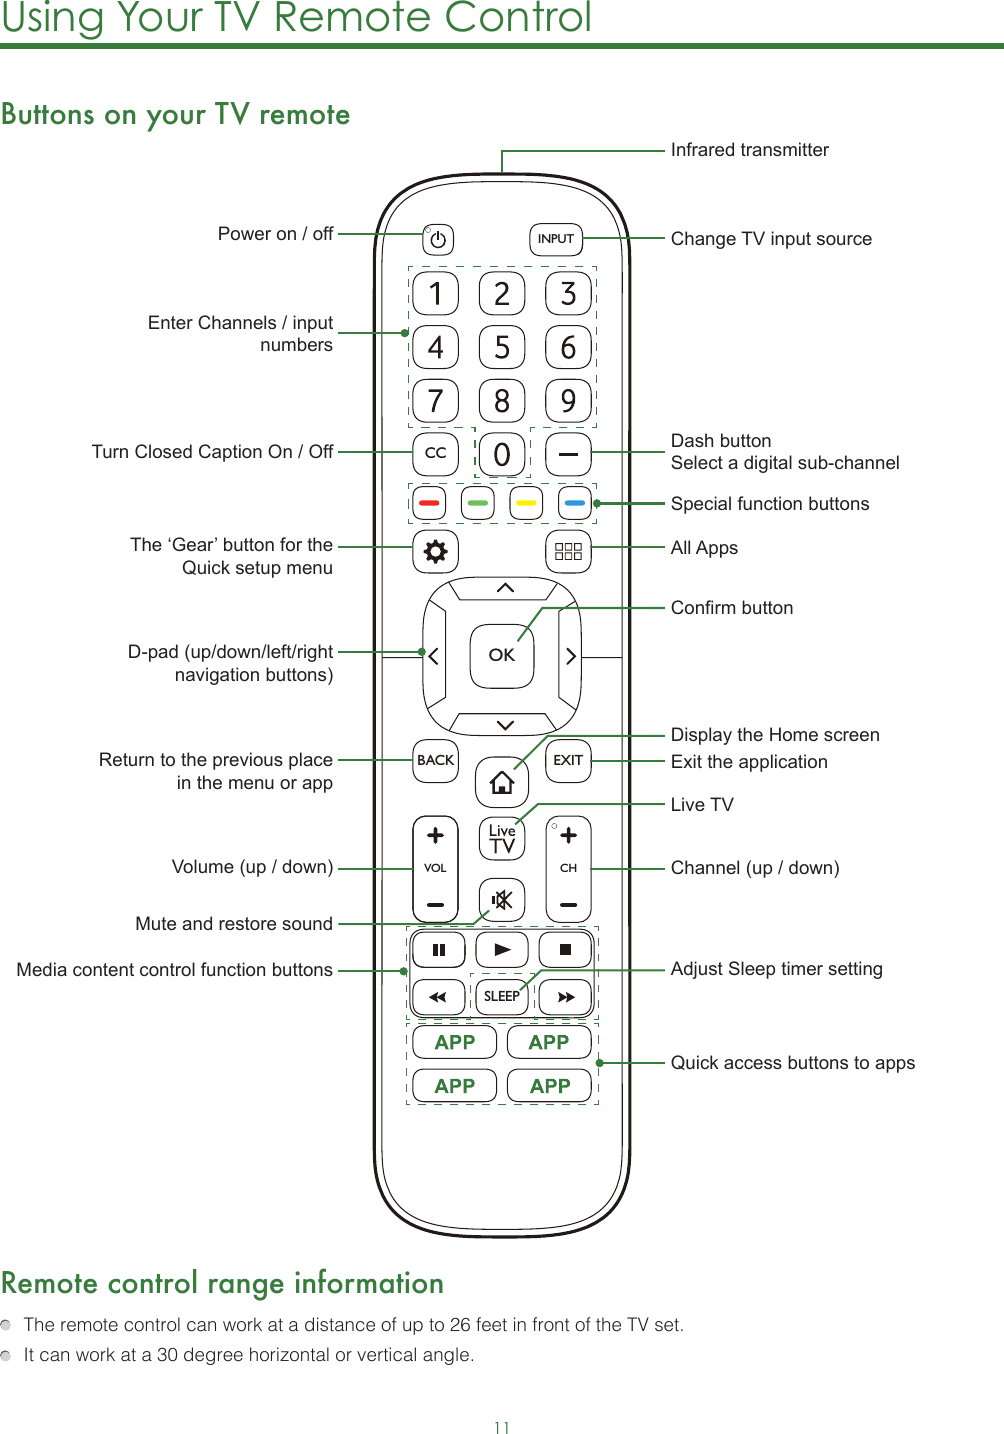 11Using Your TV Remote Control Buttons on your TV remoteRemote control range information  The remote control can work at a distance of up to 26 feet in front of the TV set.  It can work at a 30 degree horizontal or vertical angle.SLEEPVOLCHOKCCBACK EXITINPUTPower on / offEnter Channels / input numbersMedia content control function buttonsDash button Select a digital sub-channelD-pad (up/down/left/right navigation buttons)Volume (up / down)Mute and restore soundAdjust Sleep timer settingThe ‘Gear’ button for the Quick setup menuReturn to the previous place in the menu or appLive TVInfrared transmitterChange TV input sourceChannel (up / down)Exit the applicationTurn Closed Caption On / OffSpecial function buttonsAll AppsDisplay the Home screenConrm buttonQuick access buttons to apps